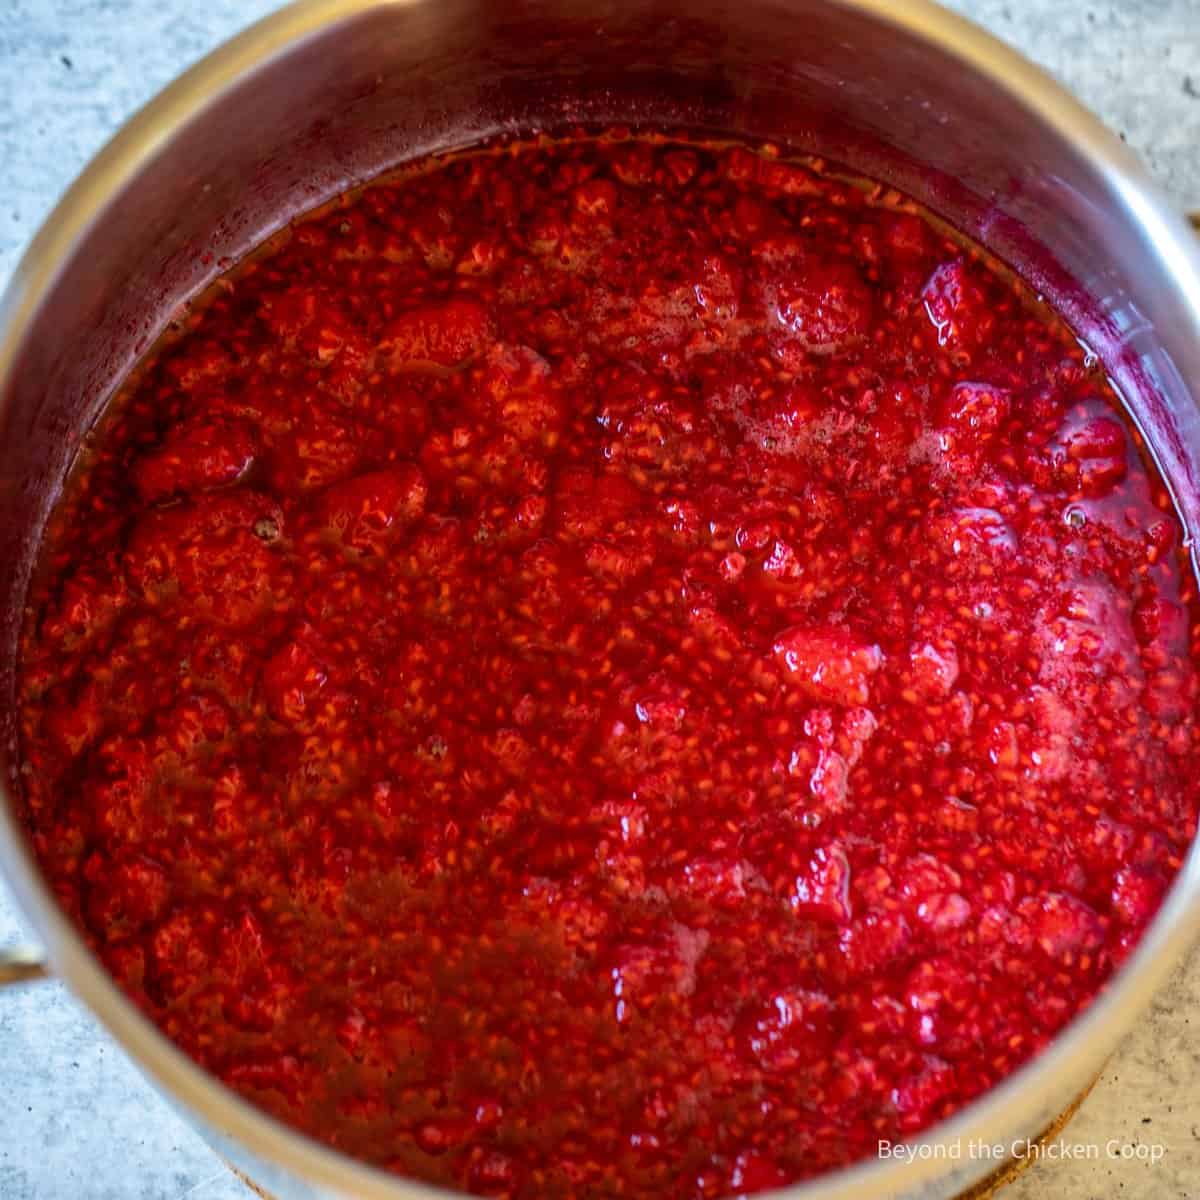 Cooked raspberries in a pot.